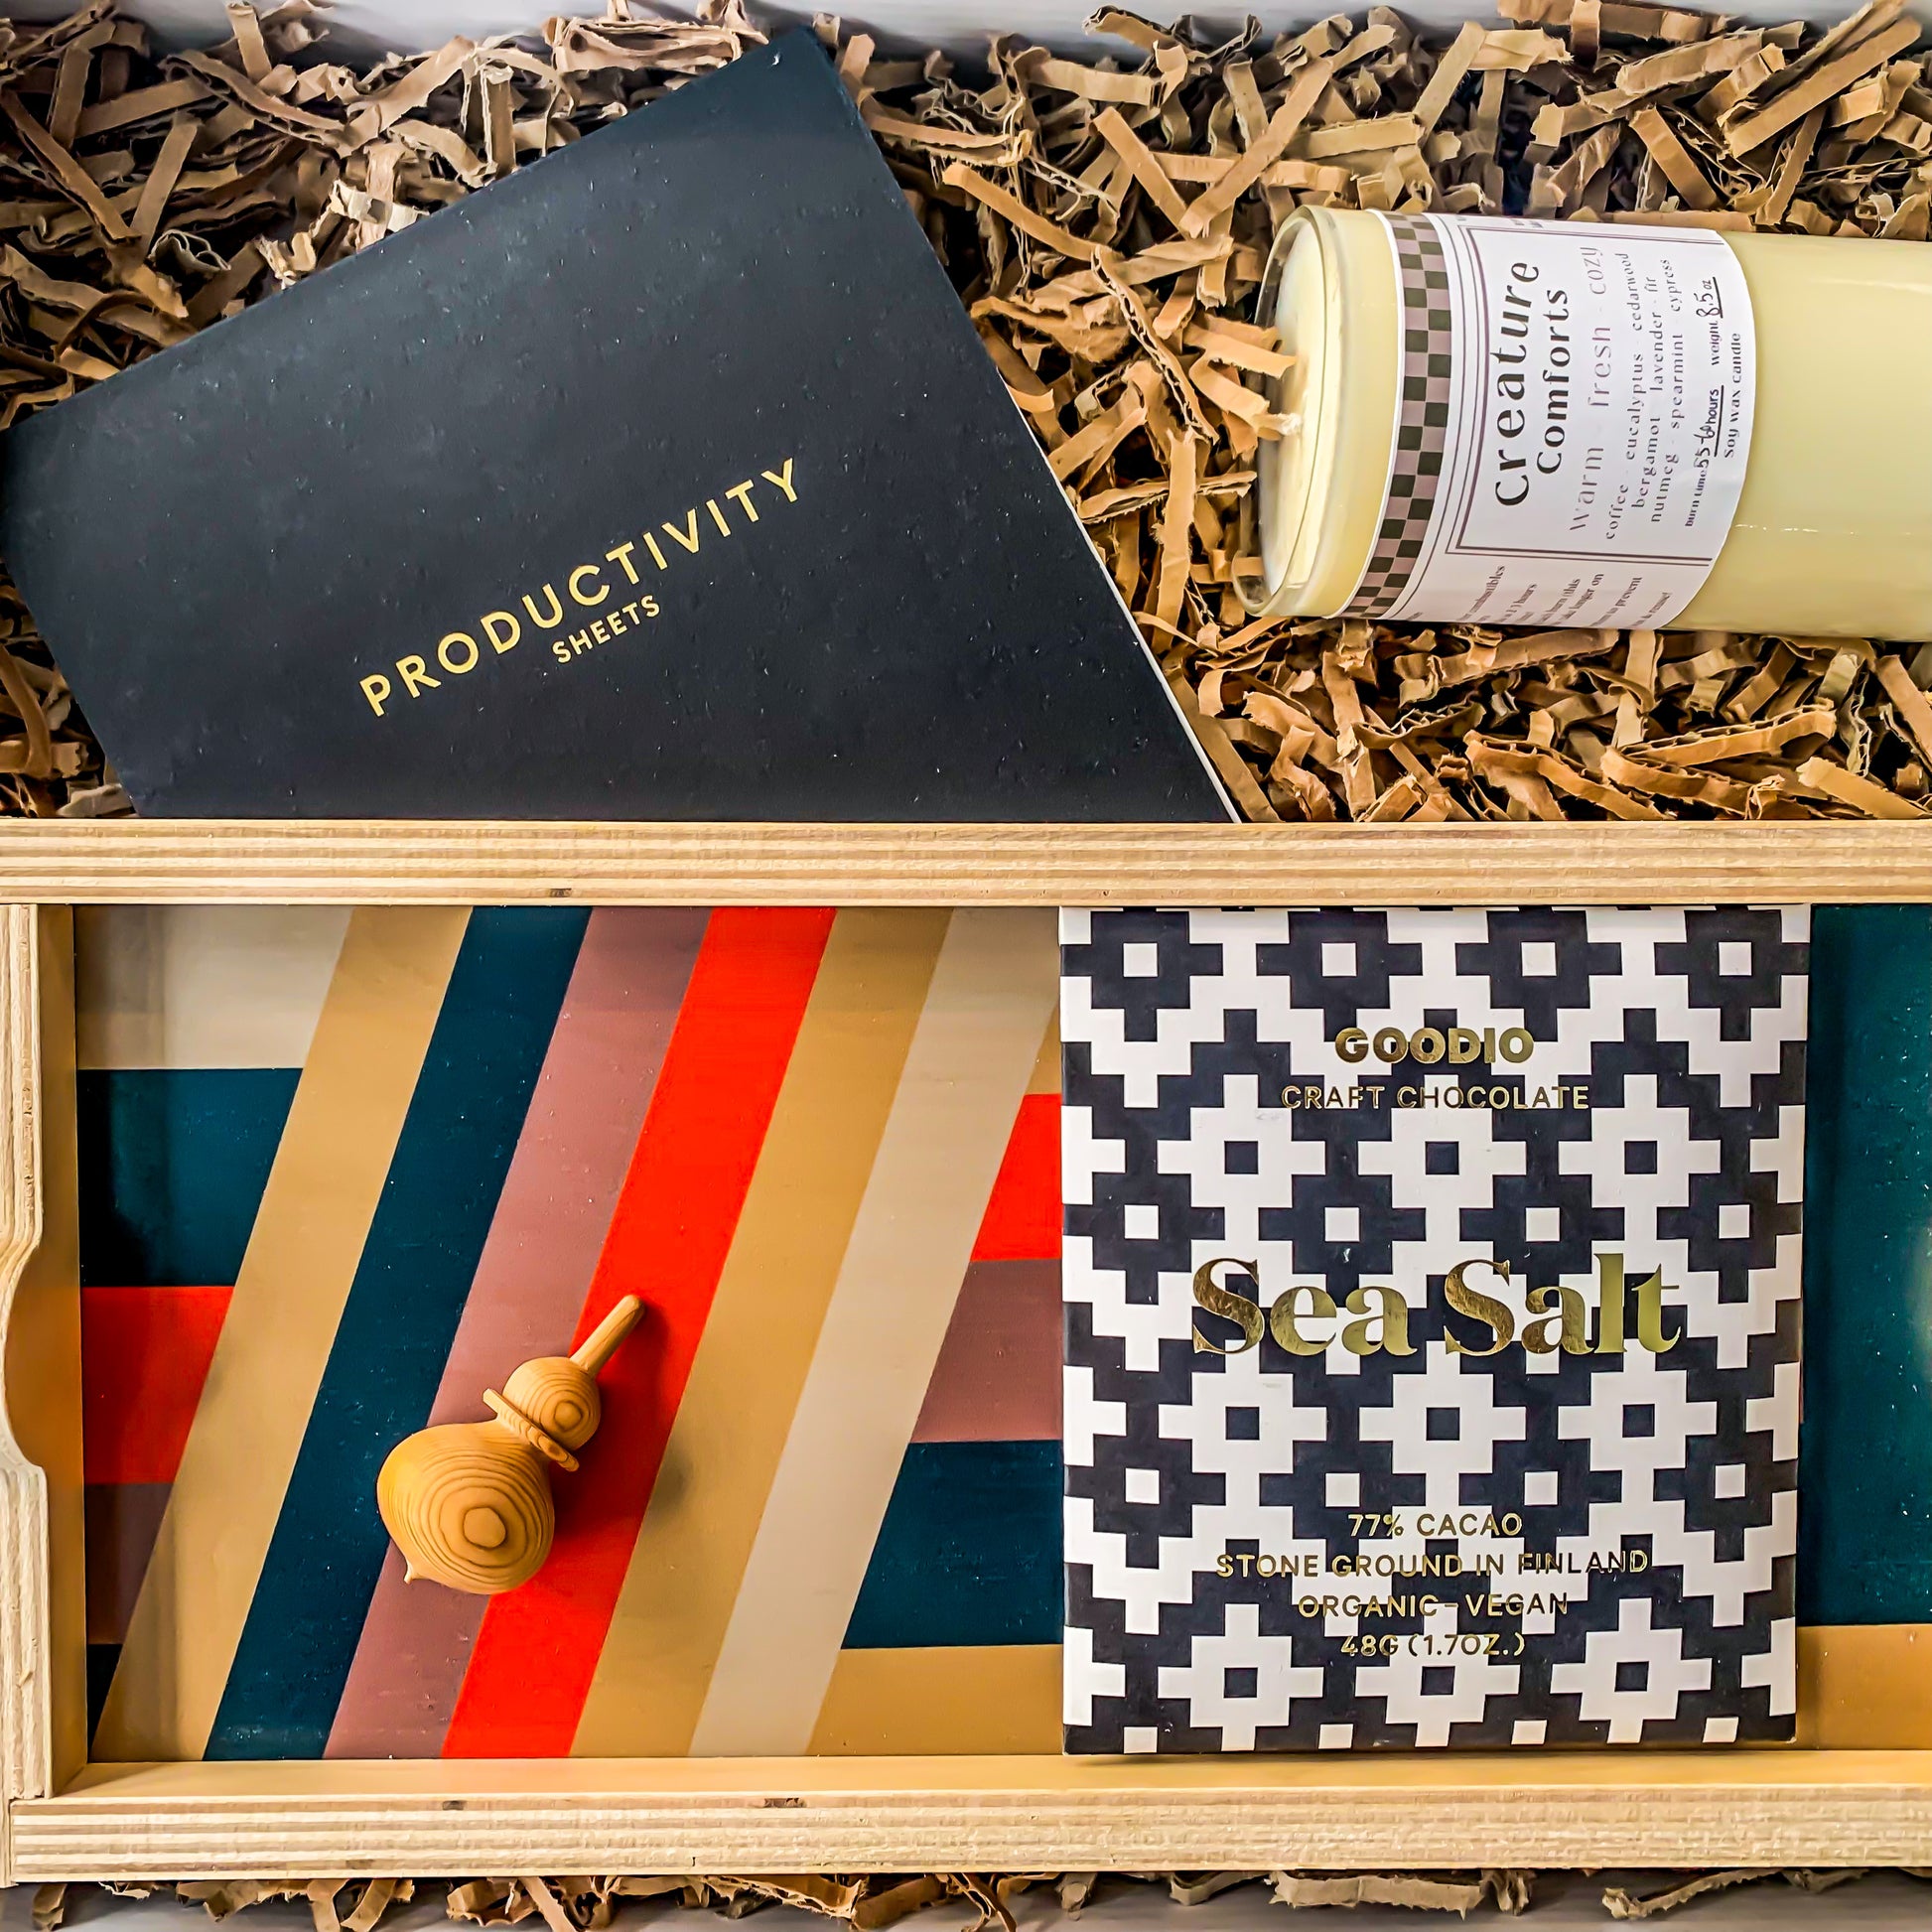 "Home Office" Gift box contains a masculine wooden tray with thick stripes and a red accent. There is a sea salt bar of chocolate,  a pack of Productivity Sheets, a wooden spinning top and a soy wax candle